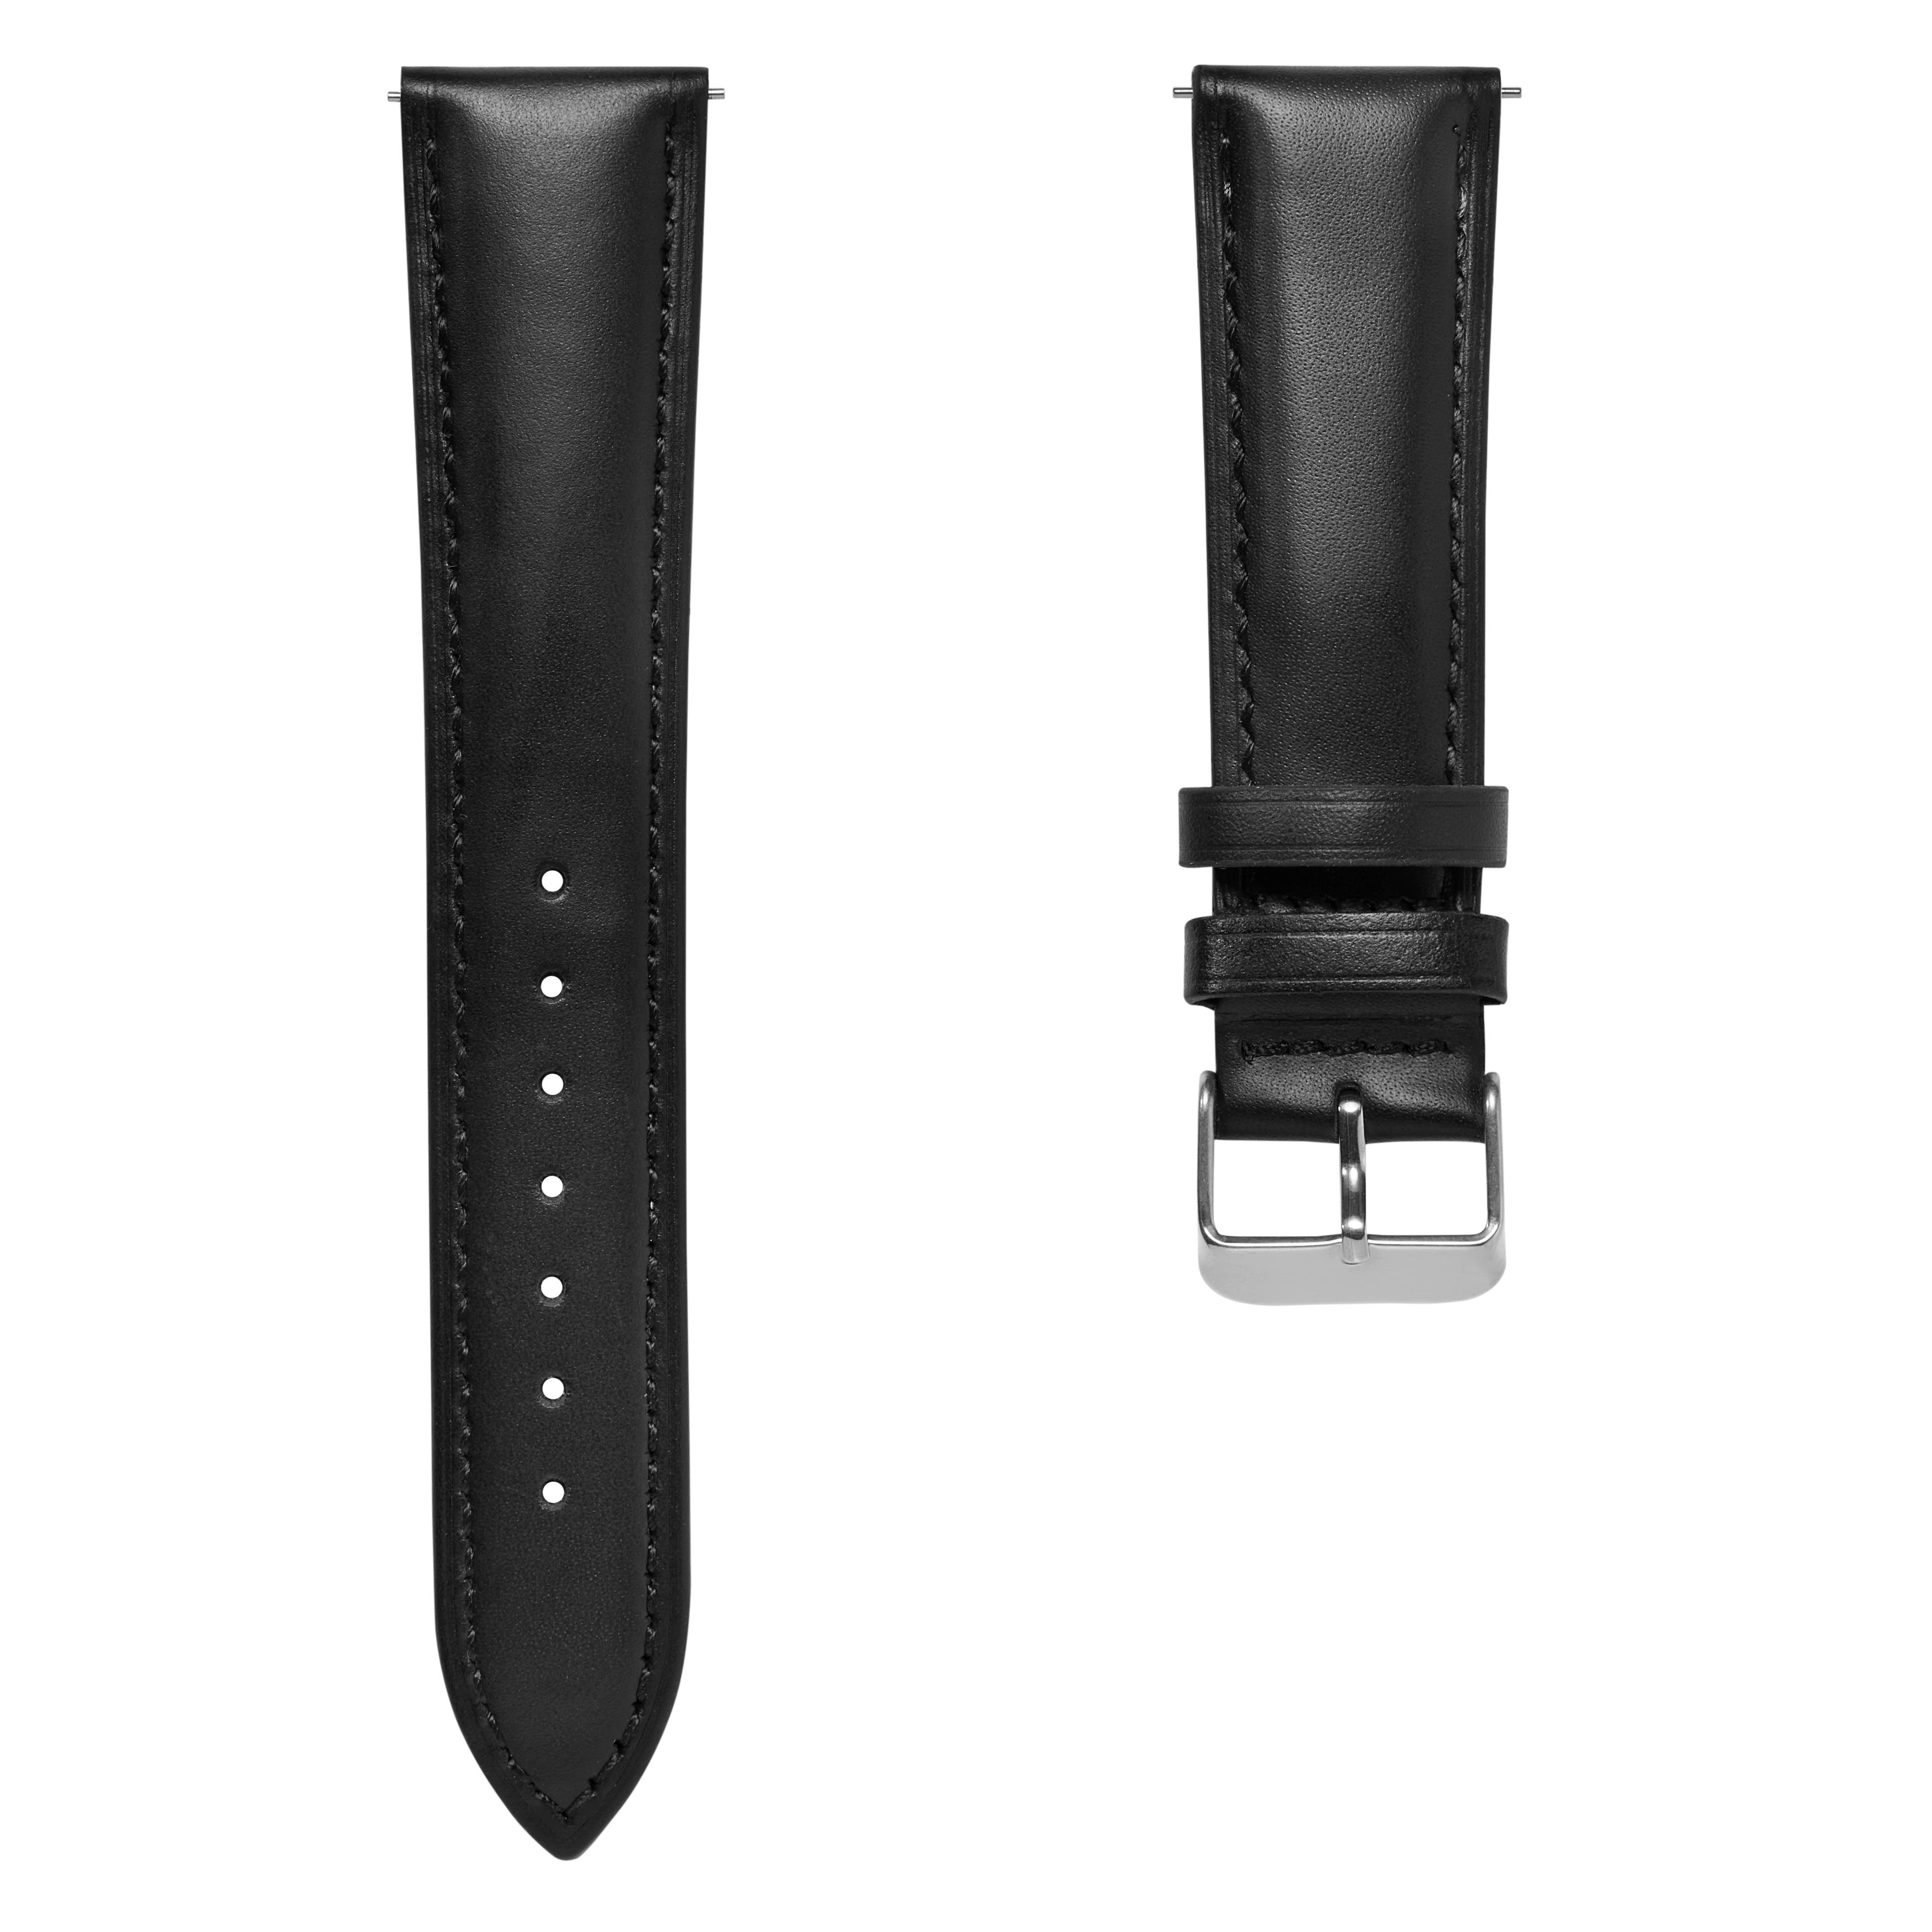 18mm Black Leather Watch Strap with Silver-Tone Buckle – Quick Release